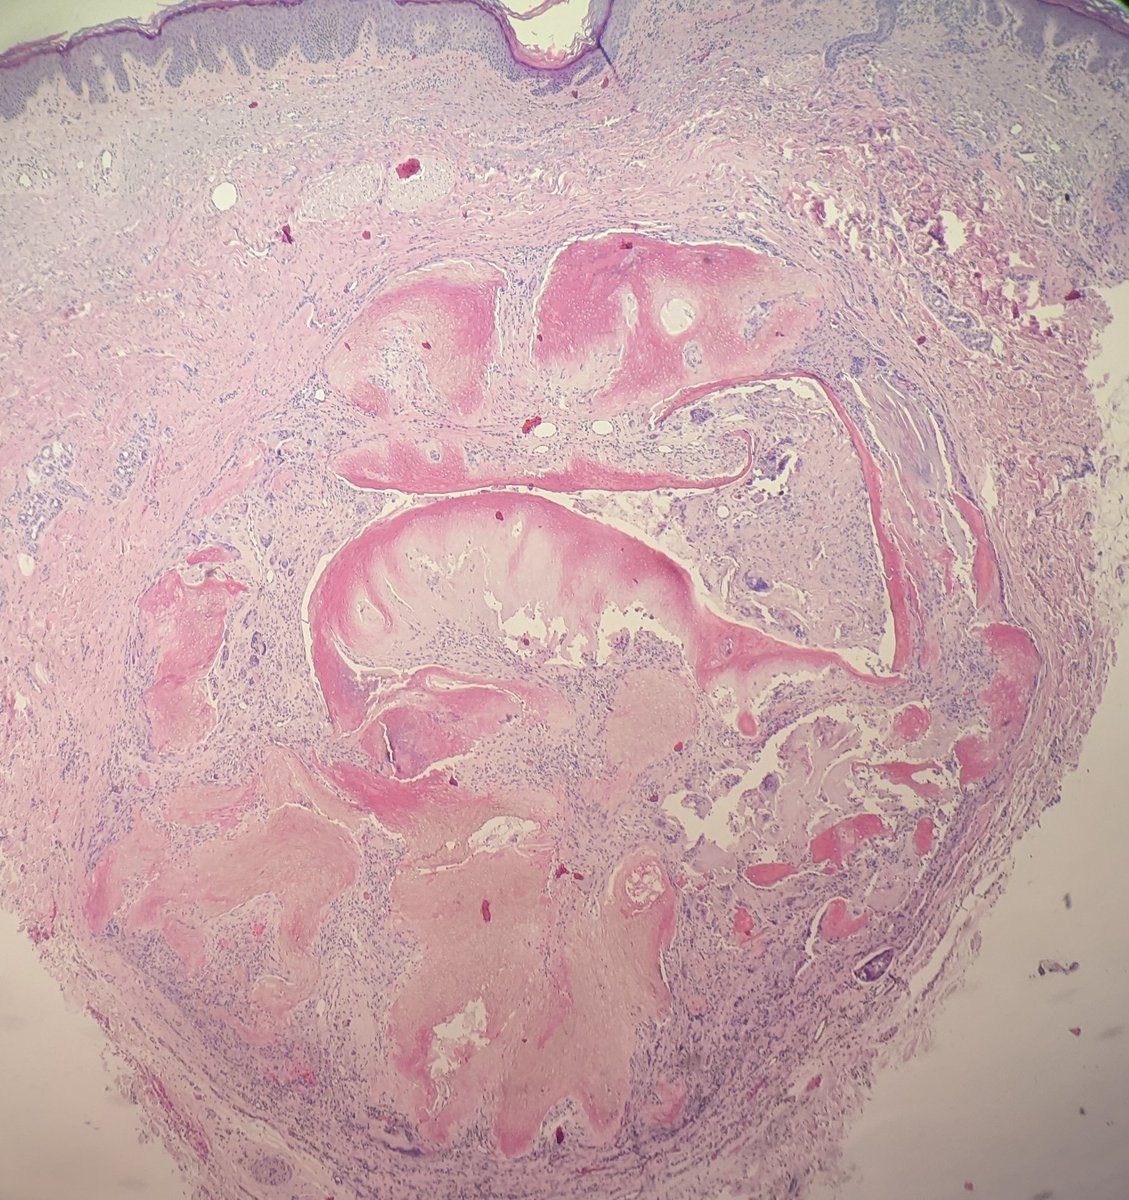 Here's a #pathspotter from my first day of #dermpath rotation! @PathSpotters